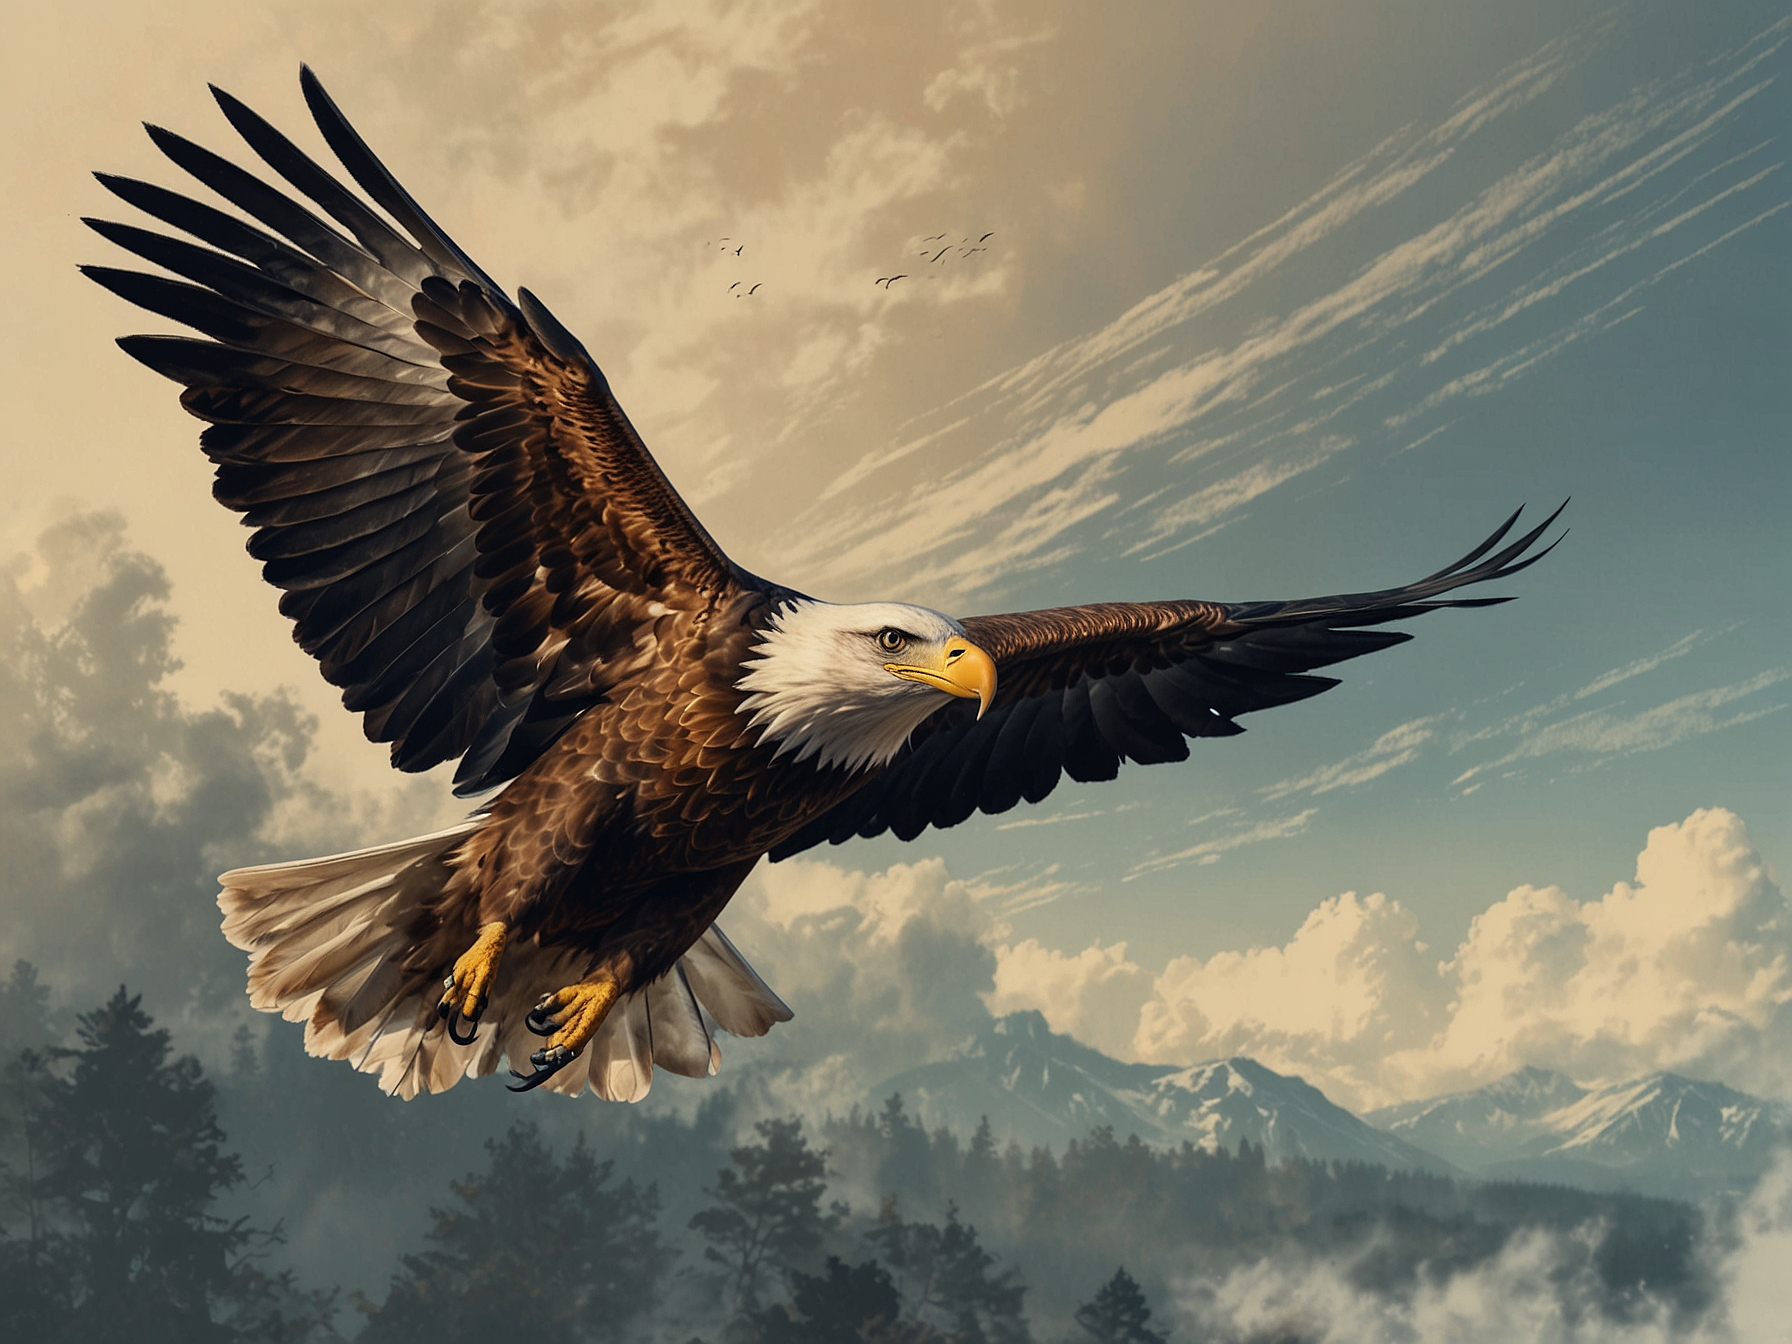 An eagle soaring high in the sky, displaying its impressive wingspan and mastery of flight.